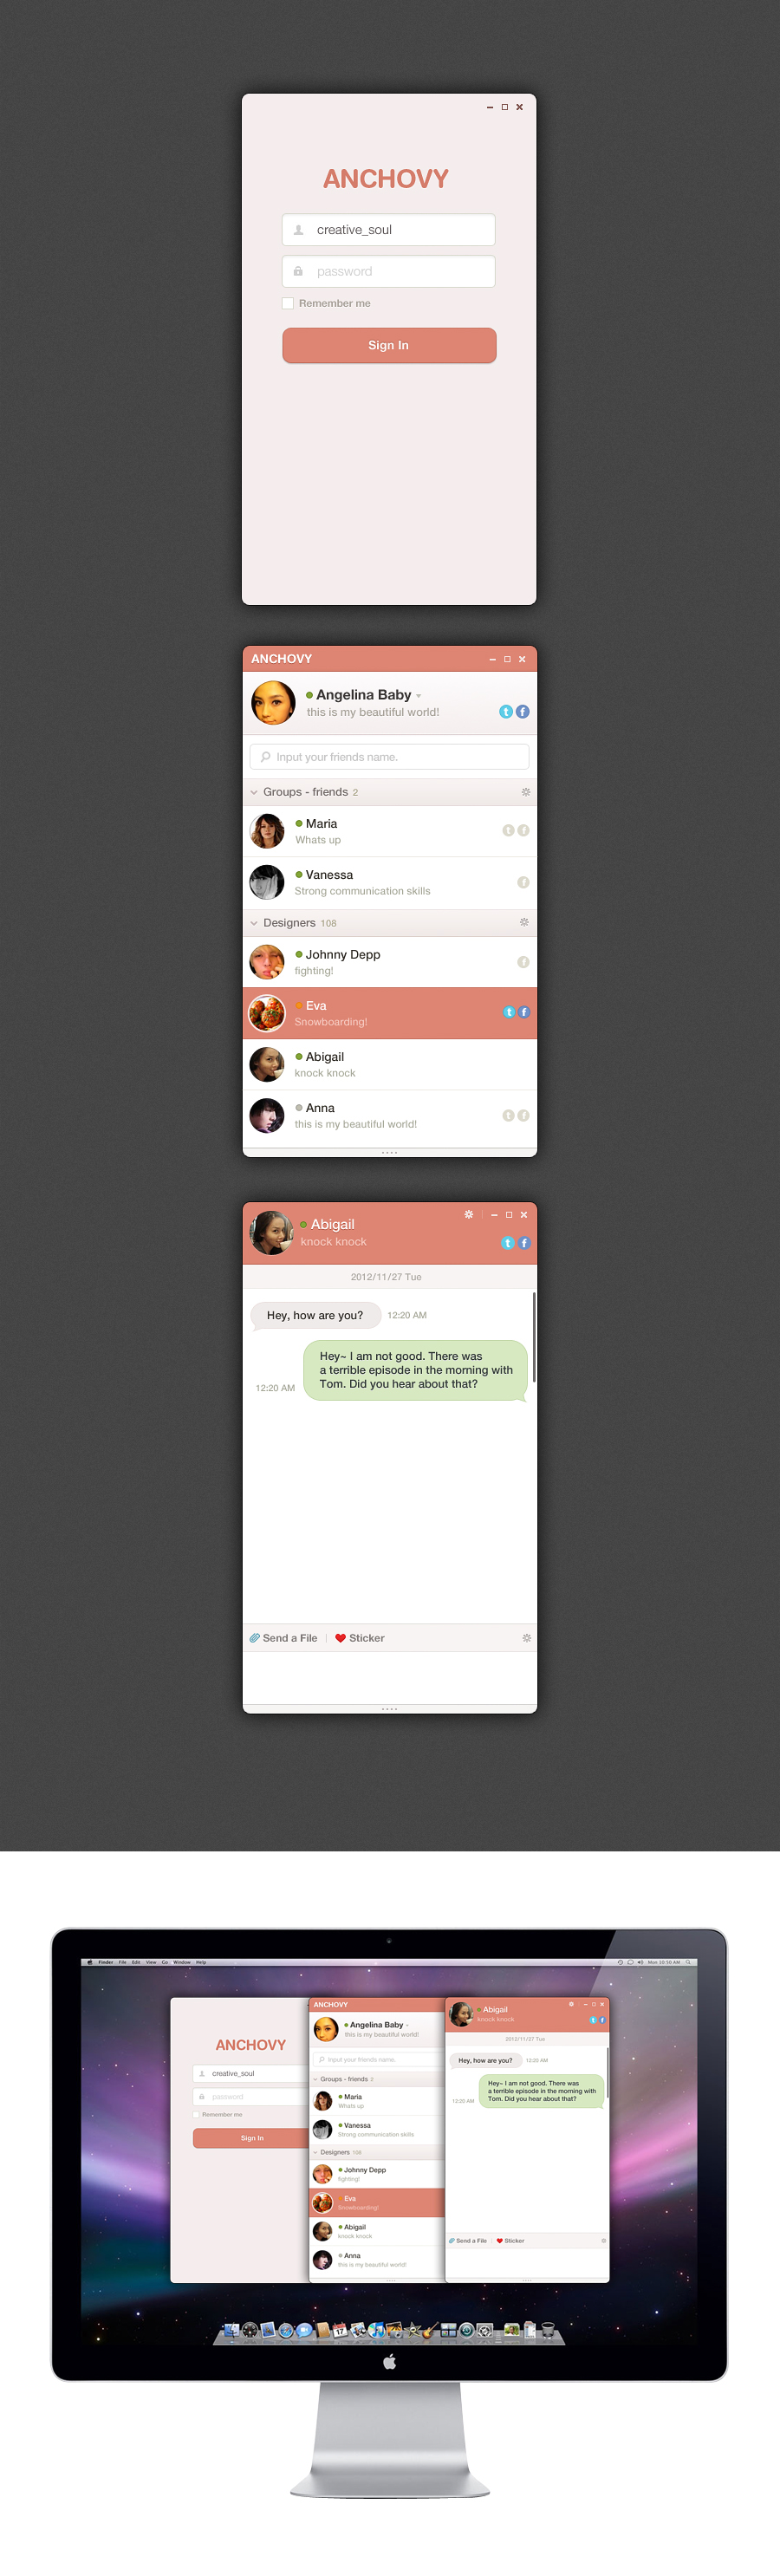 UI ux messenger user interface chatting box app application pink app design mobile ios android